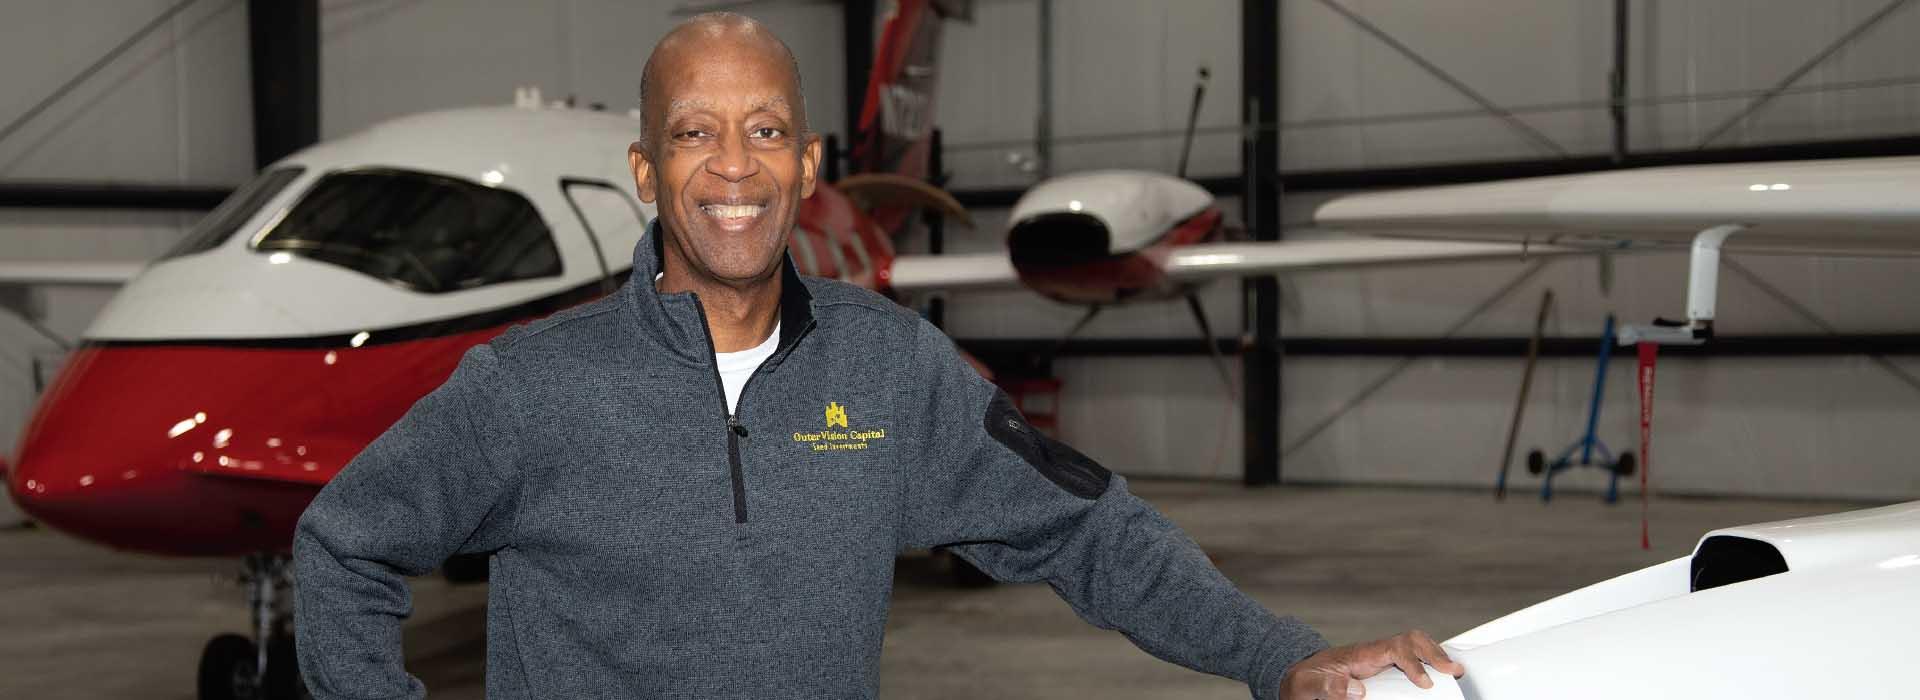 Raf, a pilot who is working to regain function at the Y after recovering from a stroke.